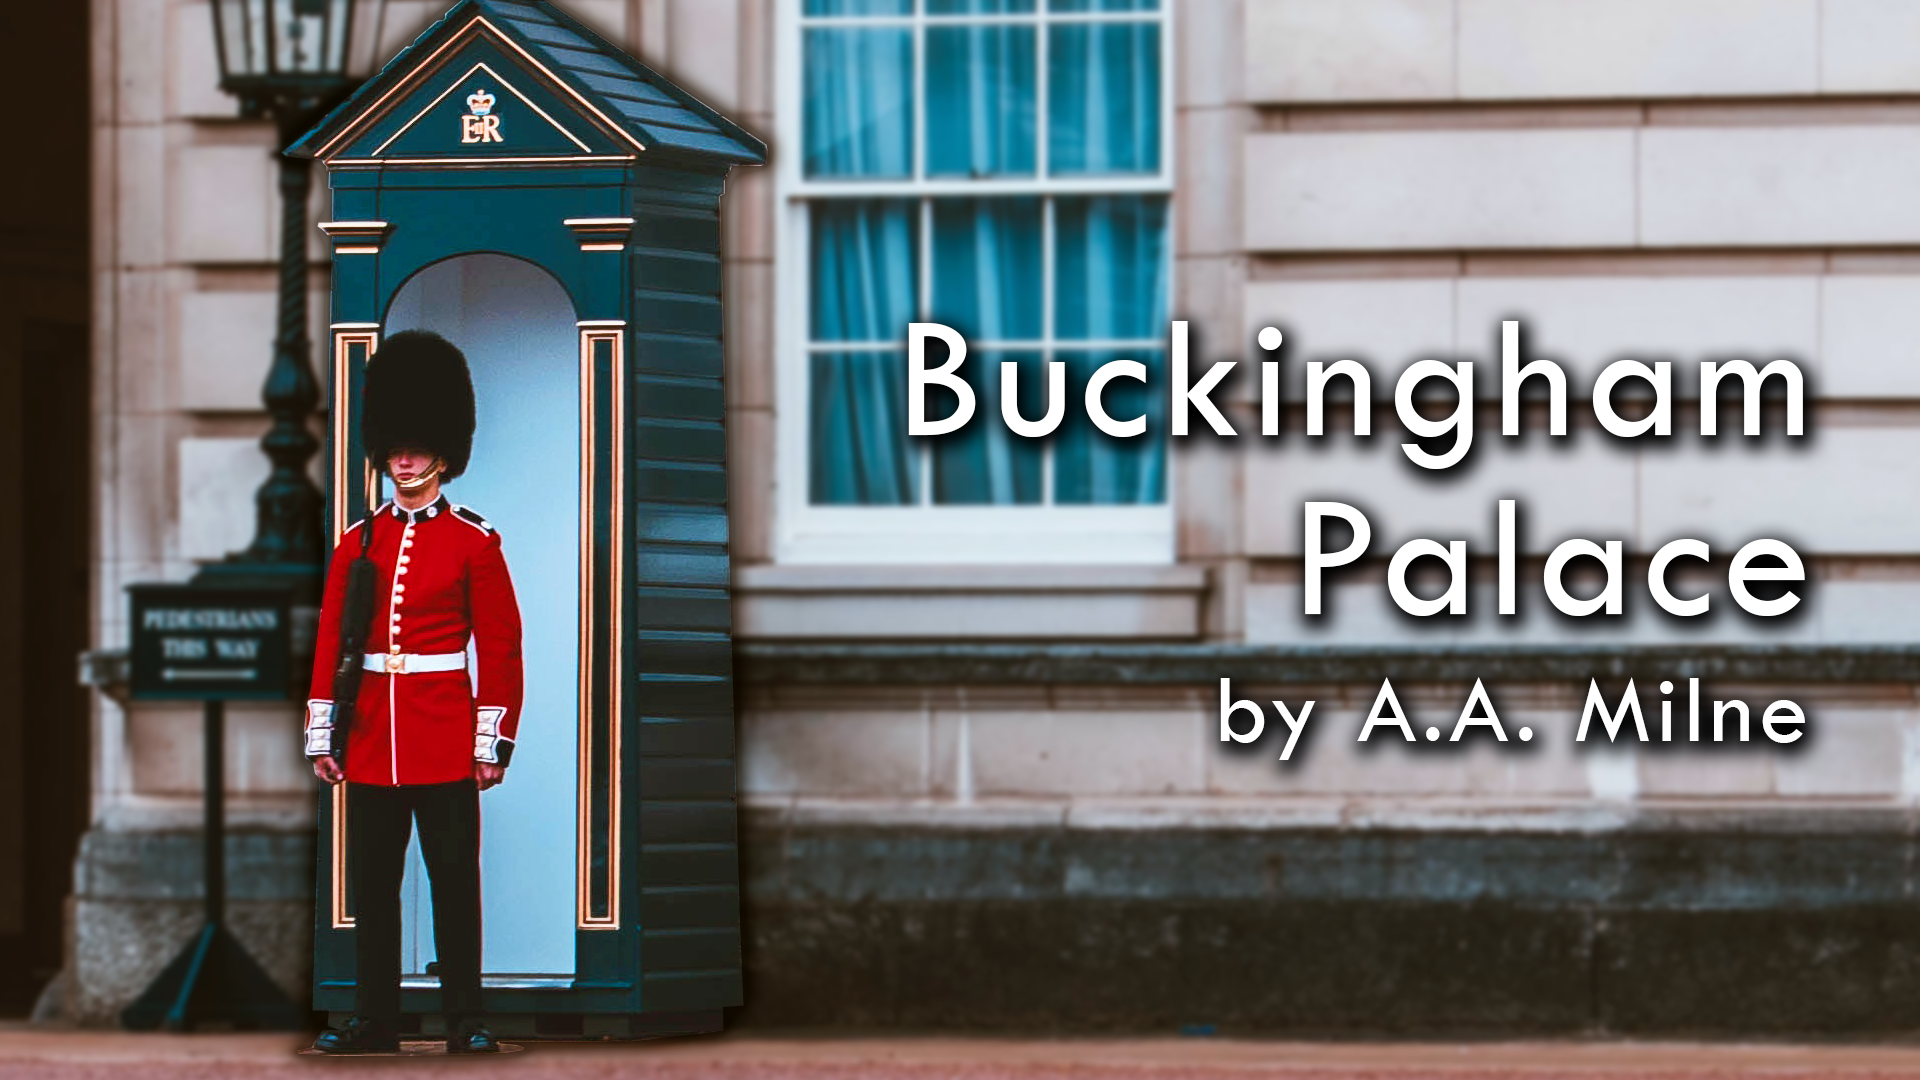 "Buckingham Palace" by A.A. Milne. Read by Zack Lawrence